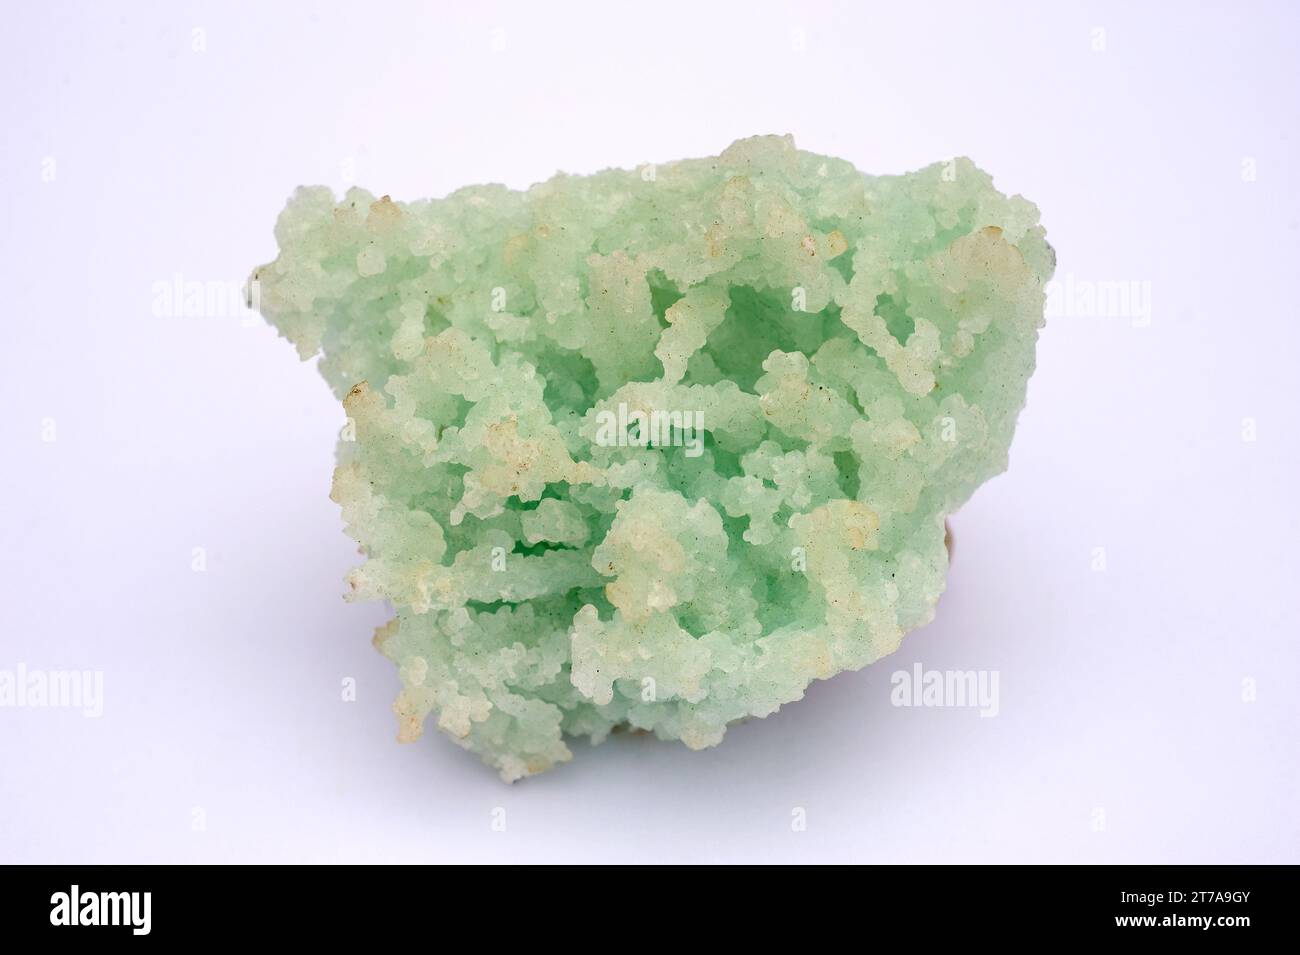 Prehnite is a calcium aluminium silicate mineral. This sample comes from India. Stock Photo